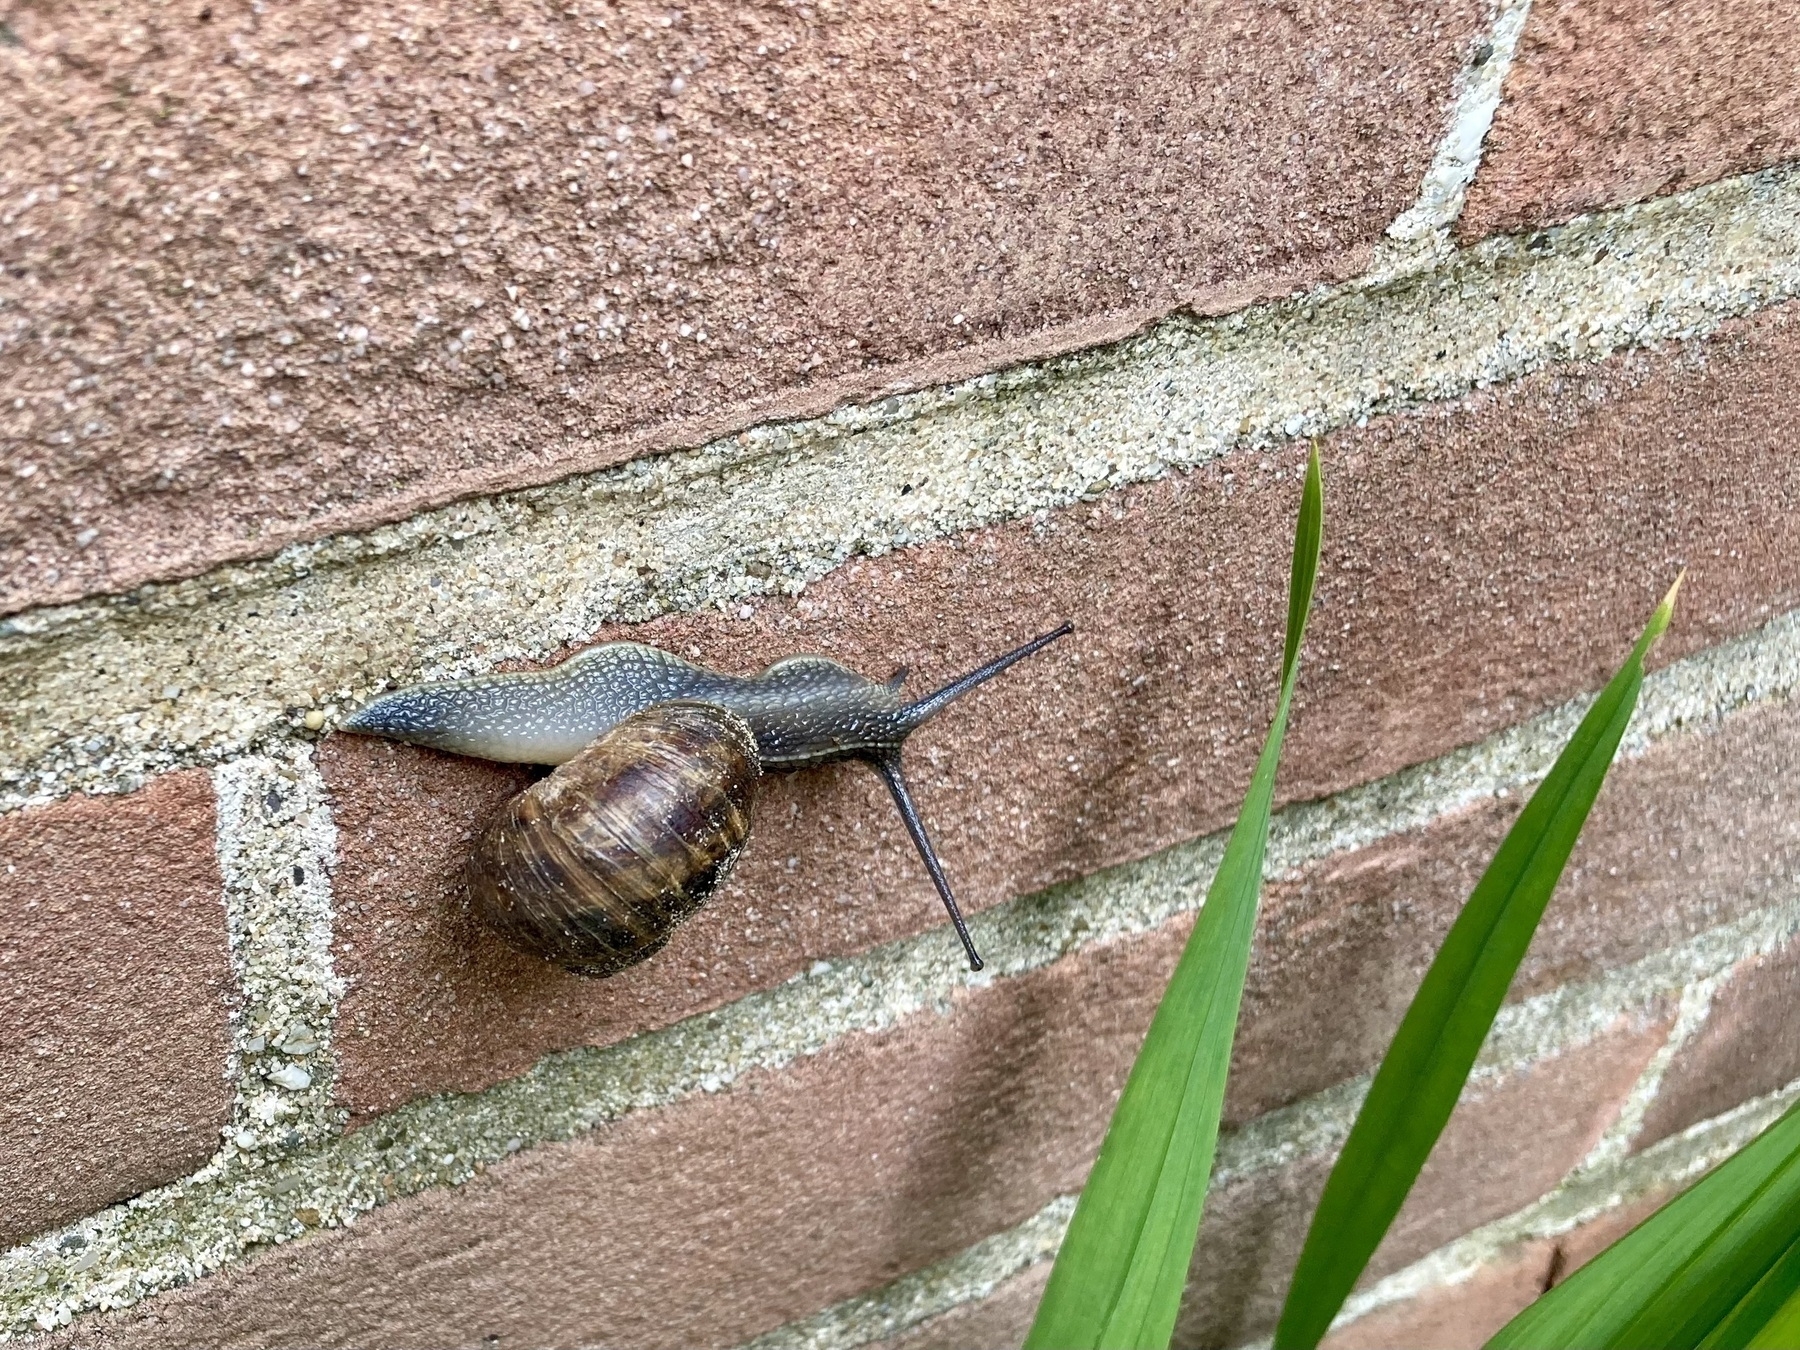 A snail is traversing a brick wall with its shell visible and part of a green plant leaf is peeking into the frame from the bottom right corner.